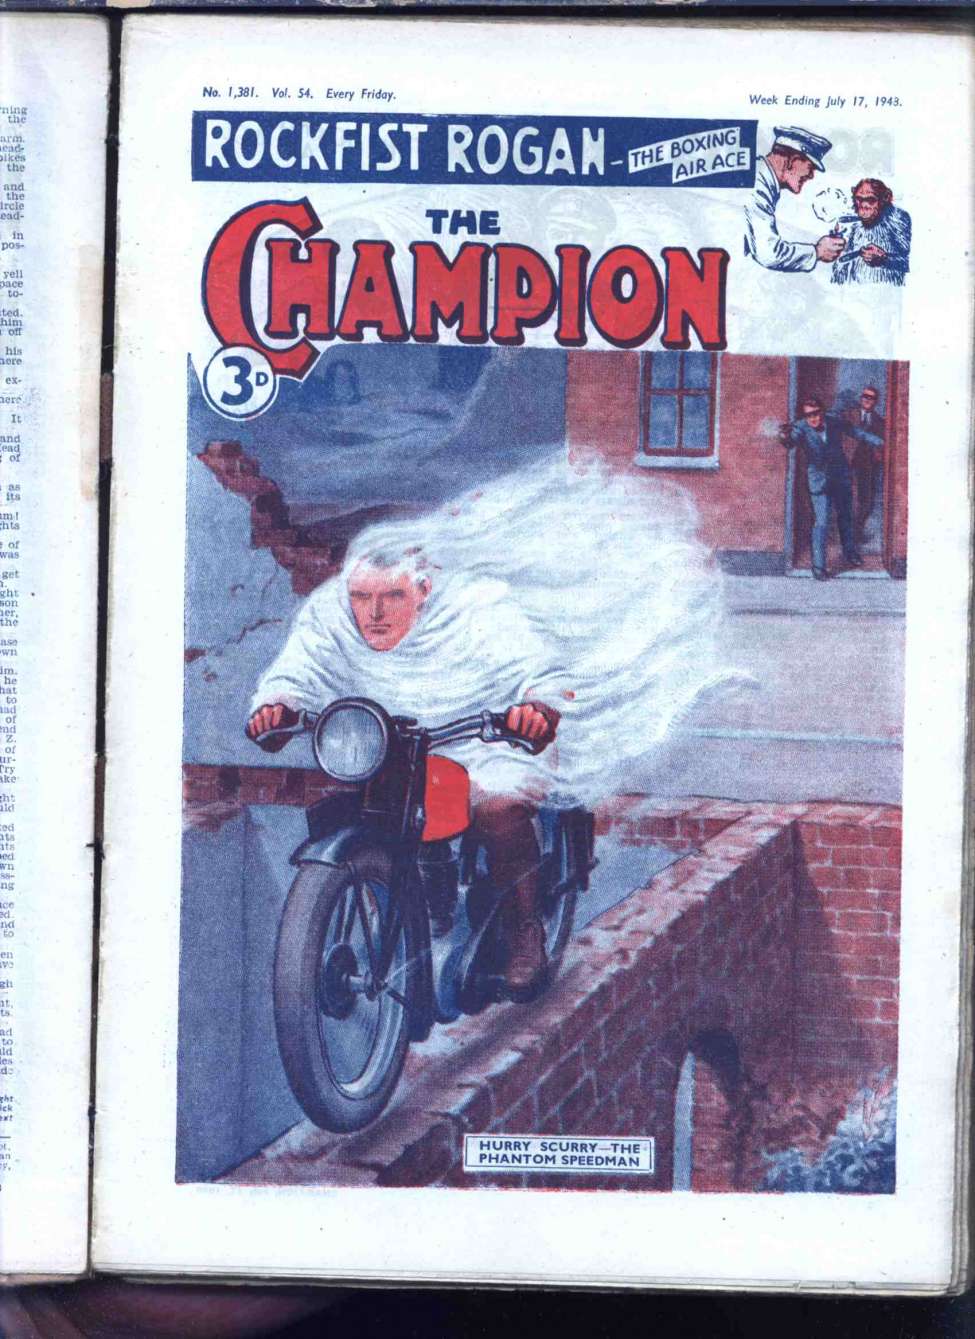 Book Cover For The Champion 1381